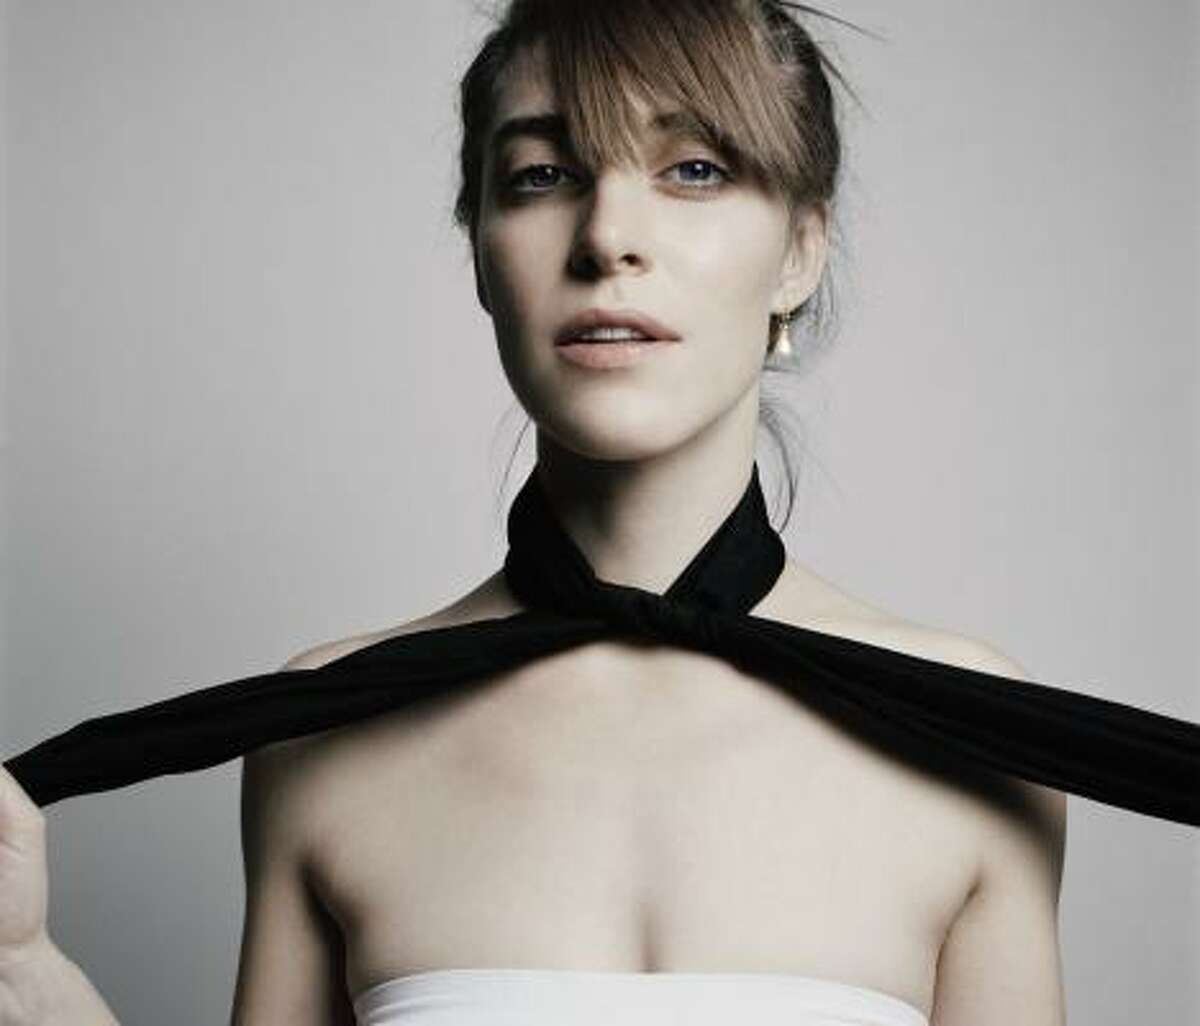 Feist's music is a measure of cool in the digital age.